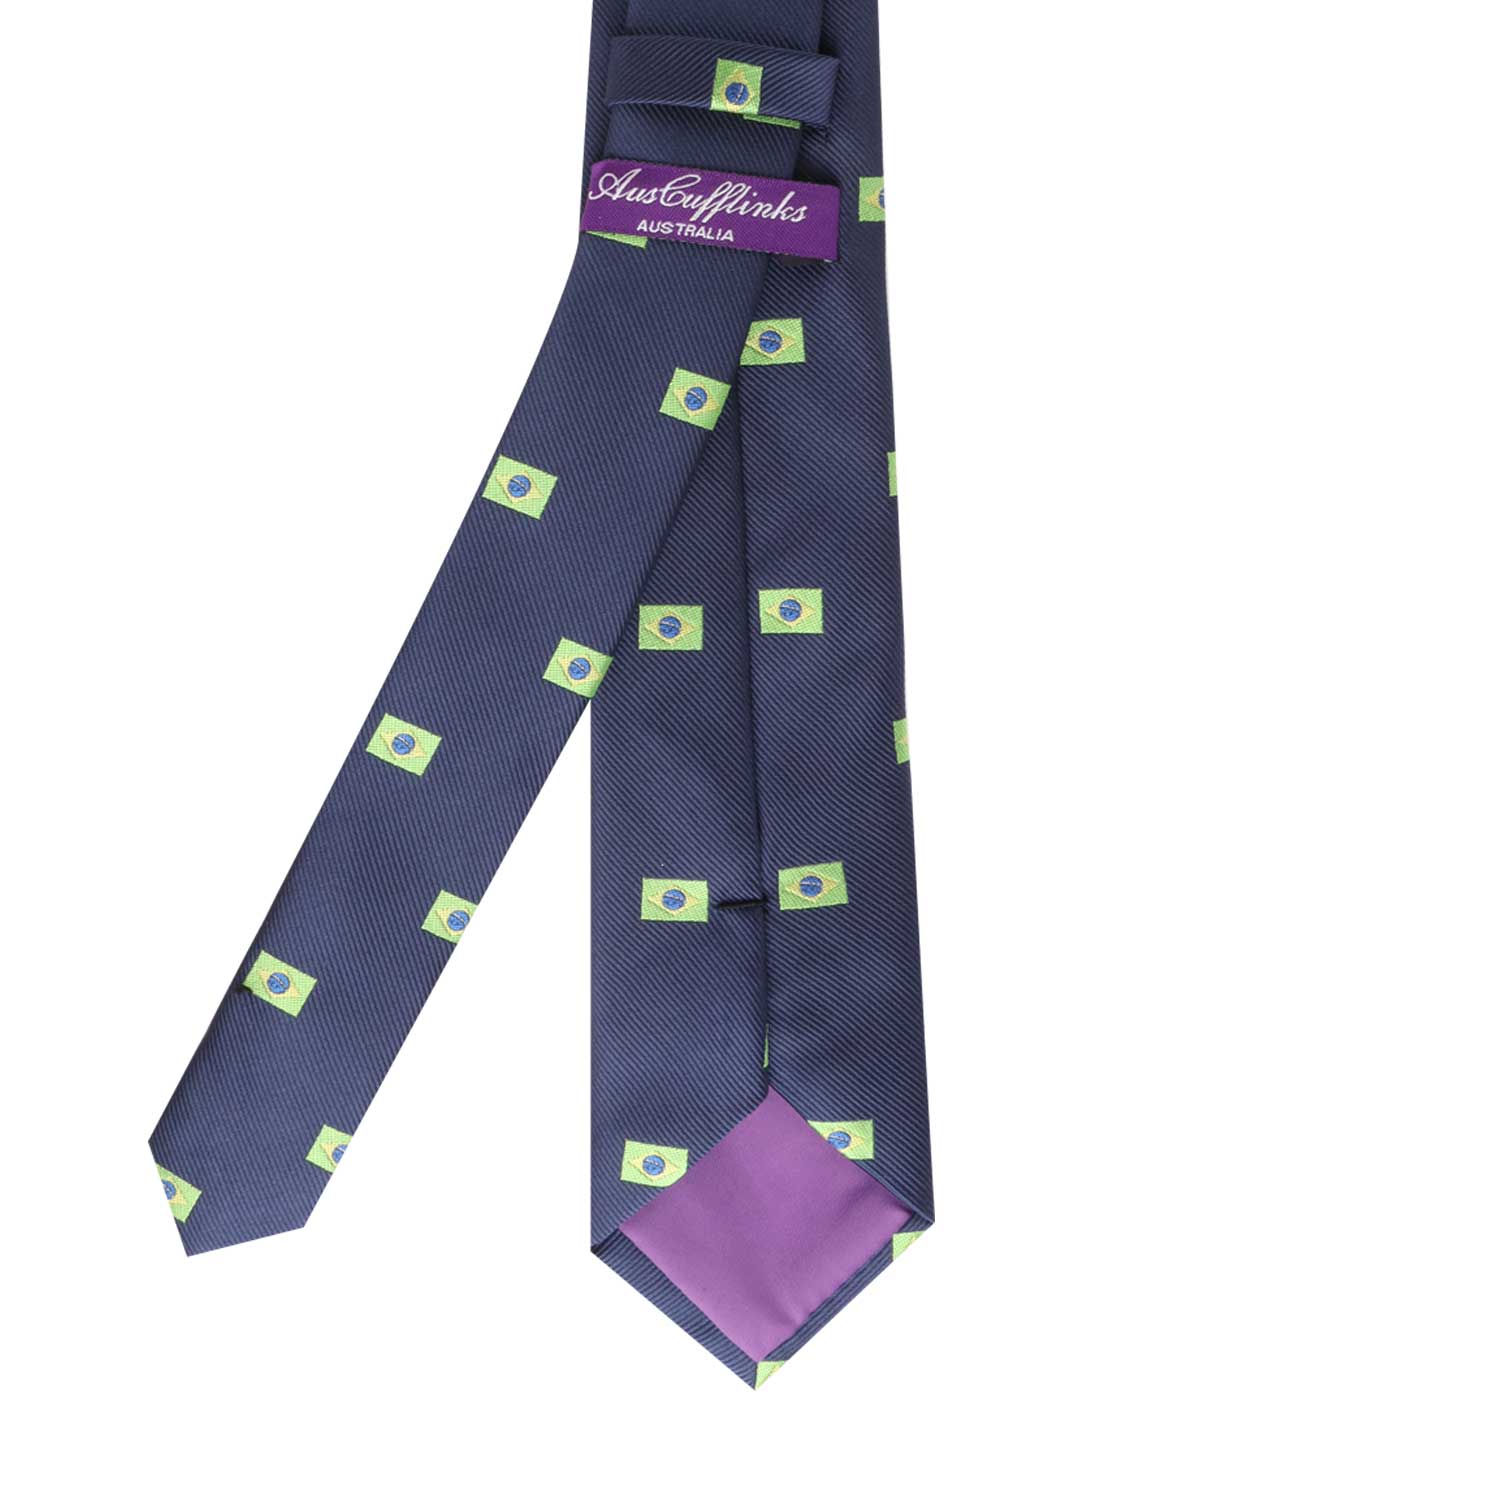 A Brazil Flag Skinny Tie with a vibrant green and purple pattern.